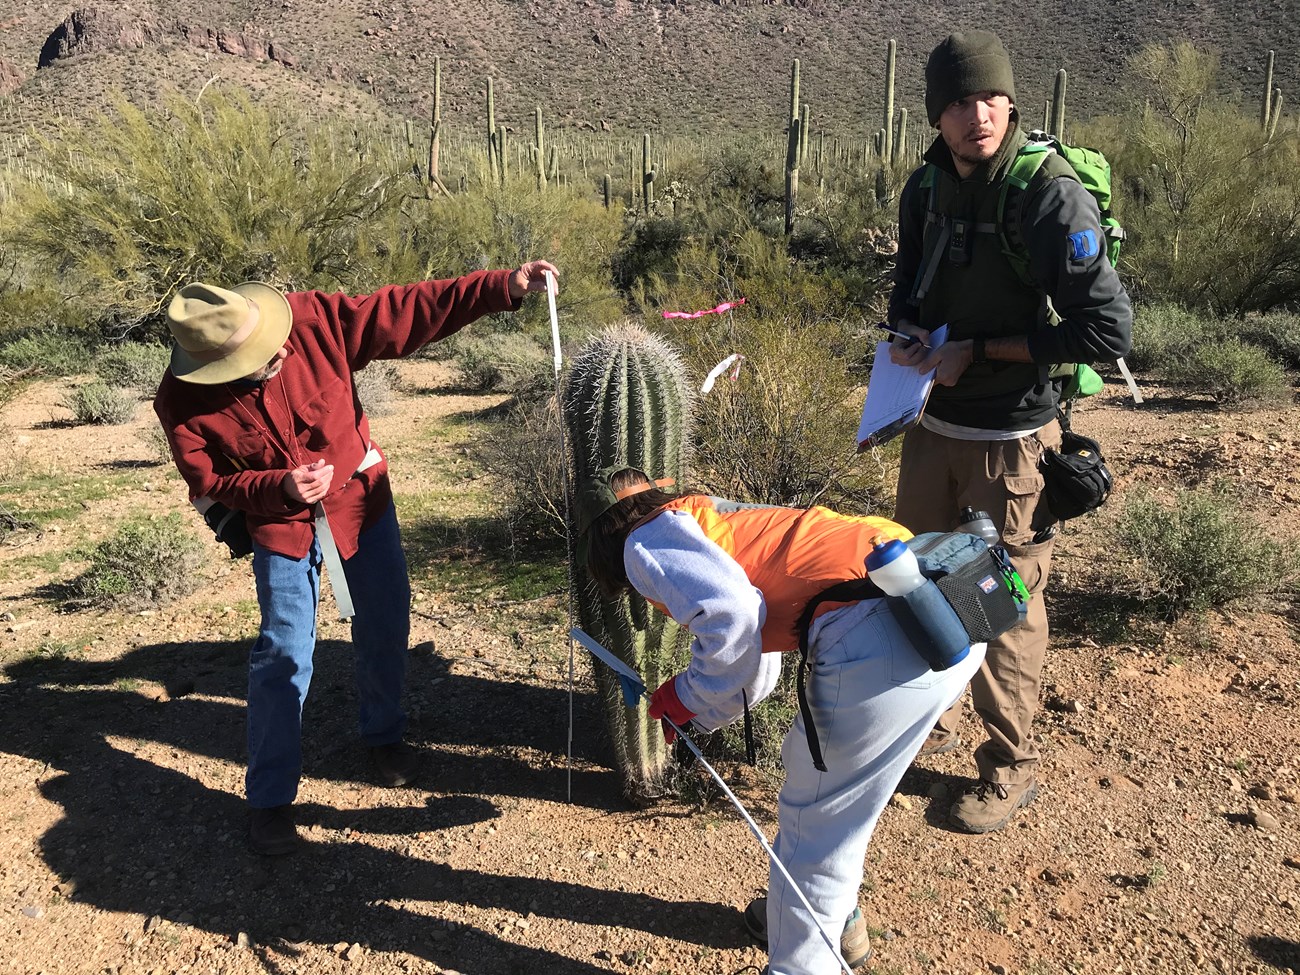 A man measuring the height of a saguaro using a folding ruler.